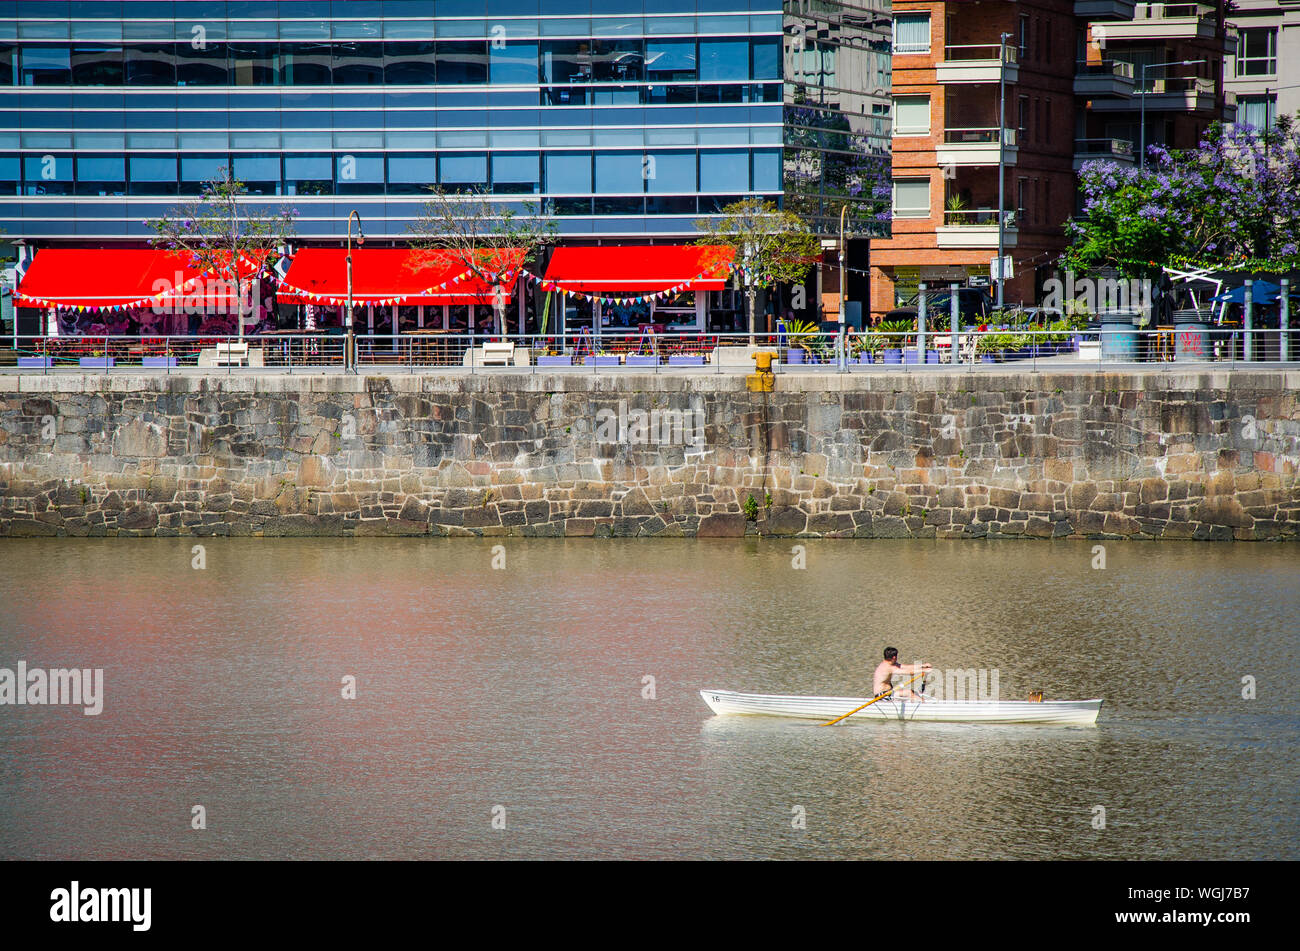 Man Rowing Boat On Lake By Buildings In City Stock Photo